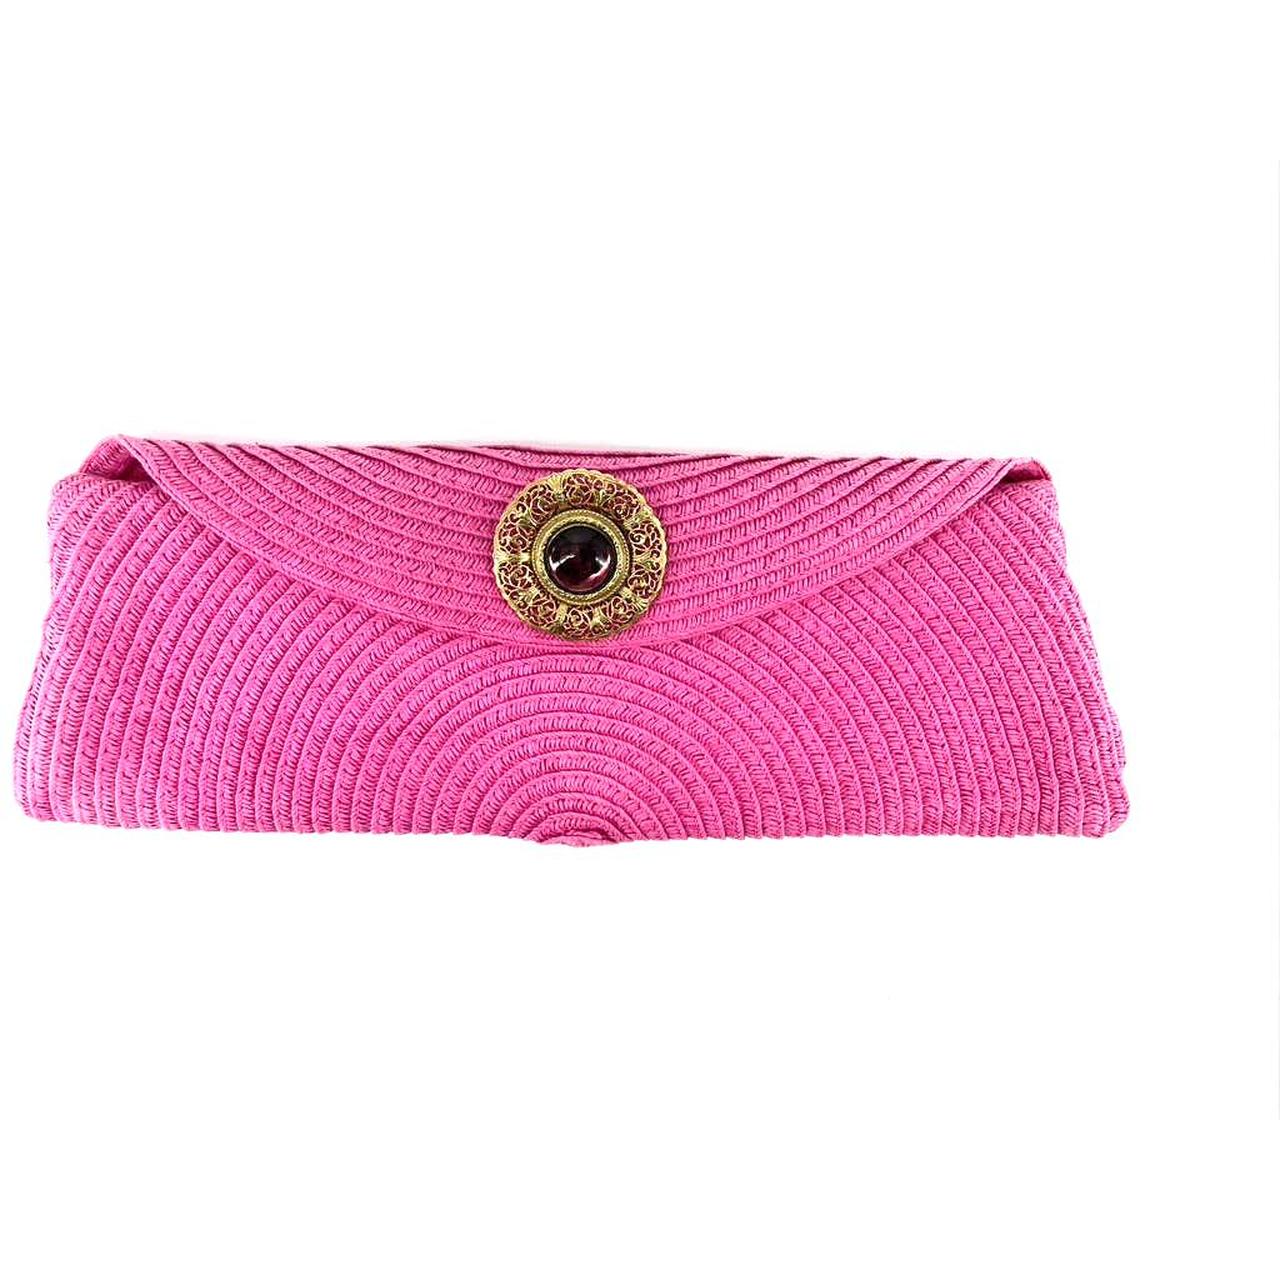 here-is-a-super-cute-handmade-clutch-pink-with-a-depop